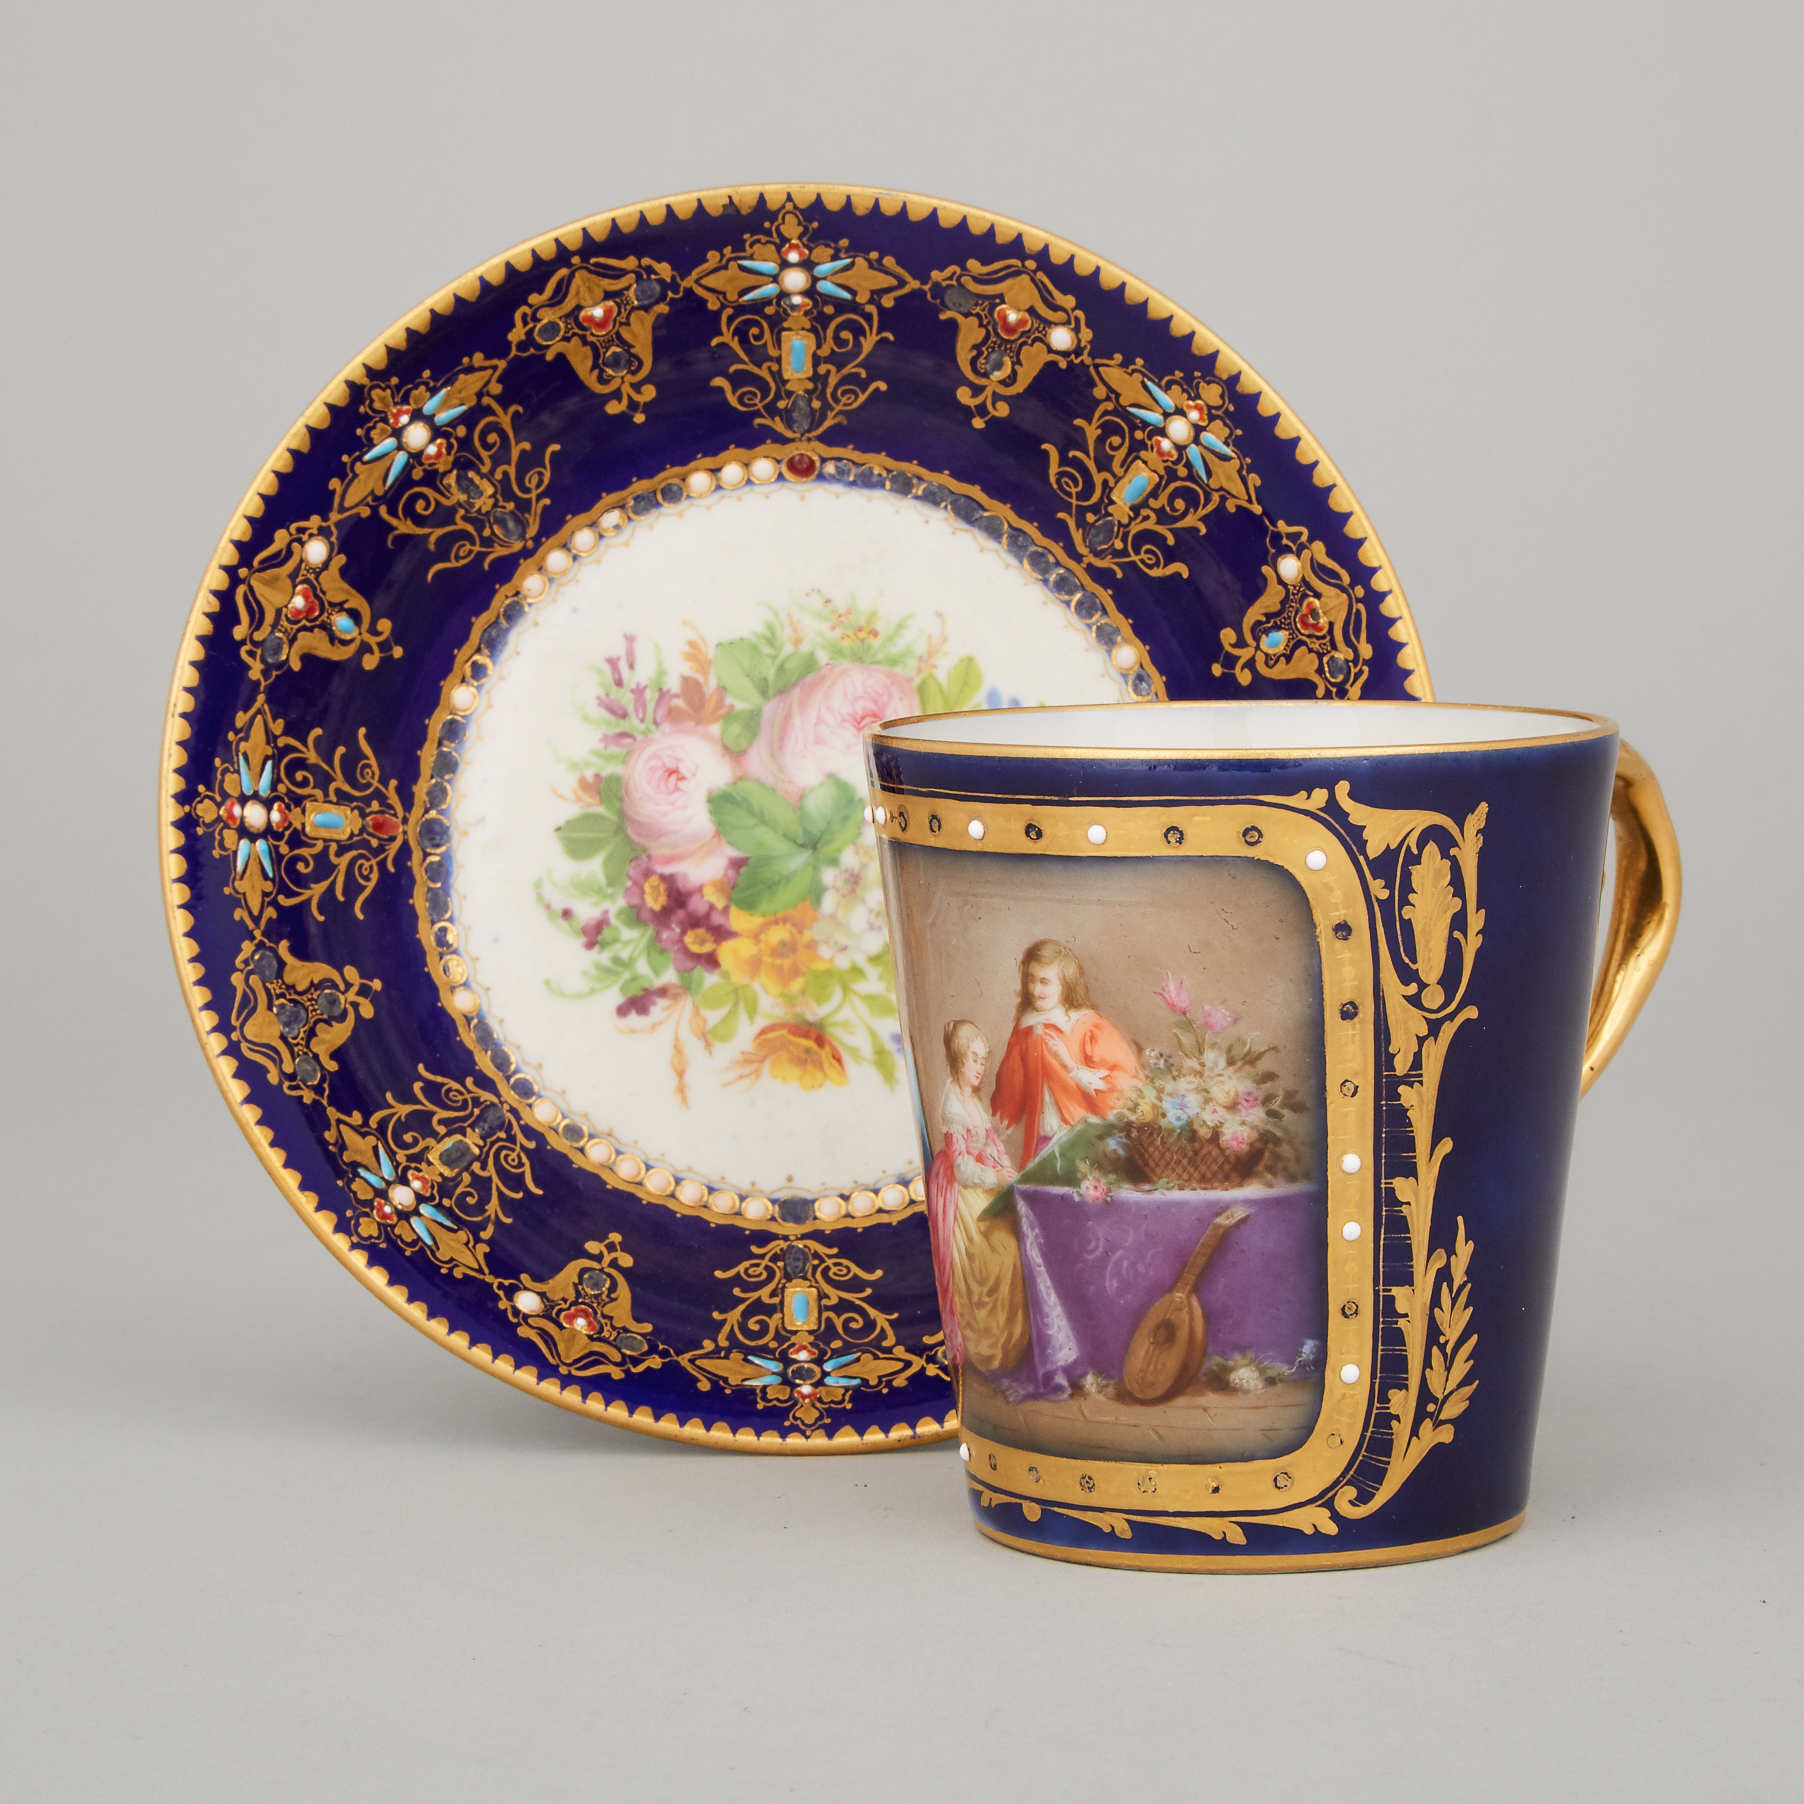 'Sèvres' 'Jeweled' Blue Ground Cup and a Saucer, late 19th/early 20th century